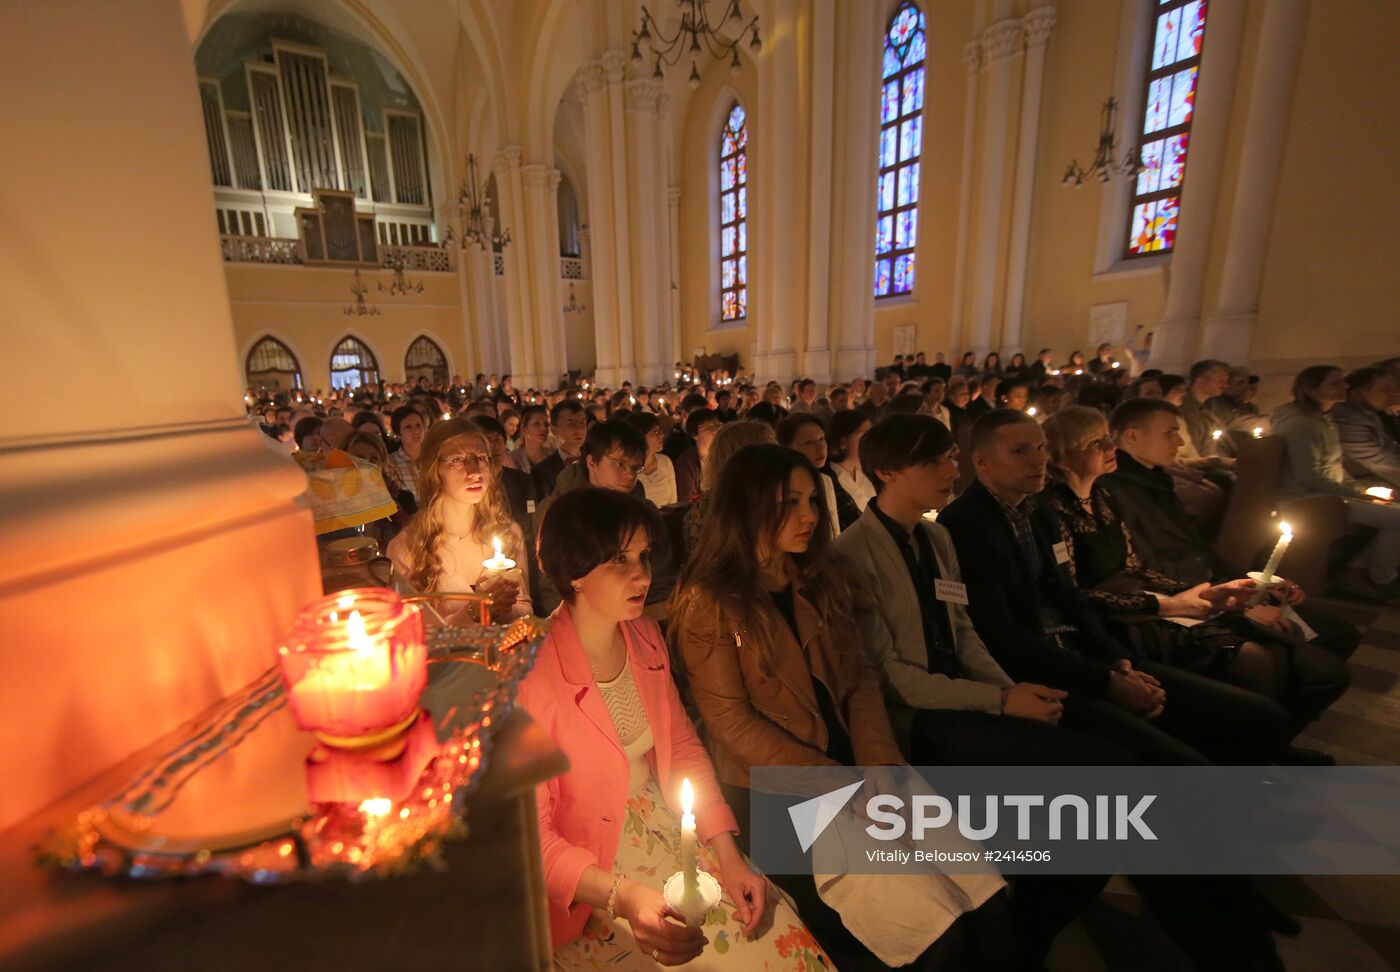 Catholic Easter celebrations in Russia